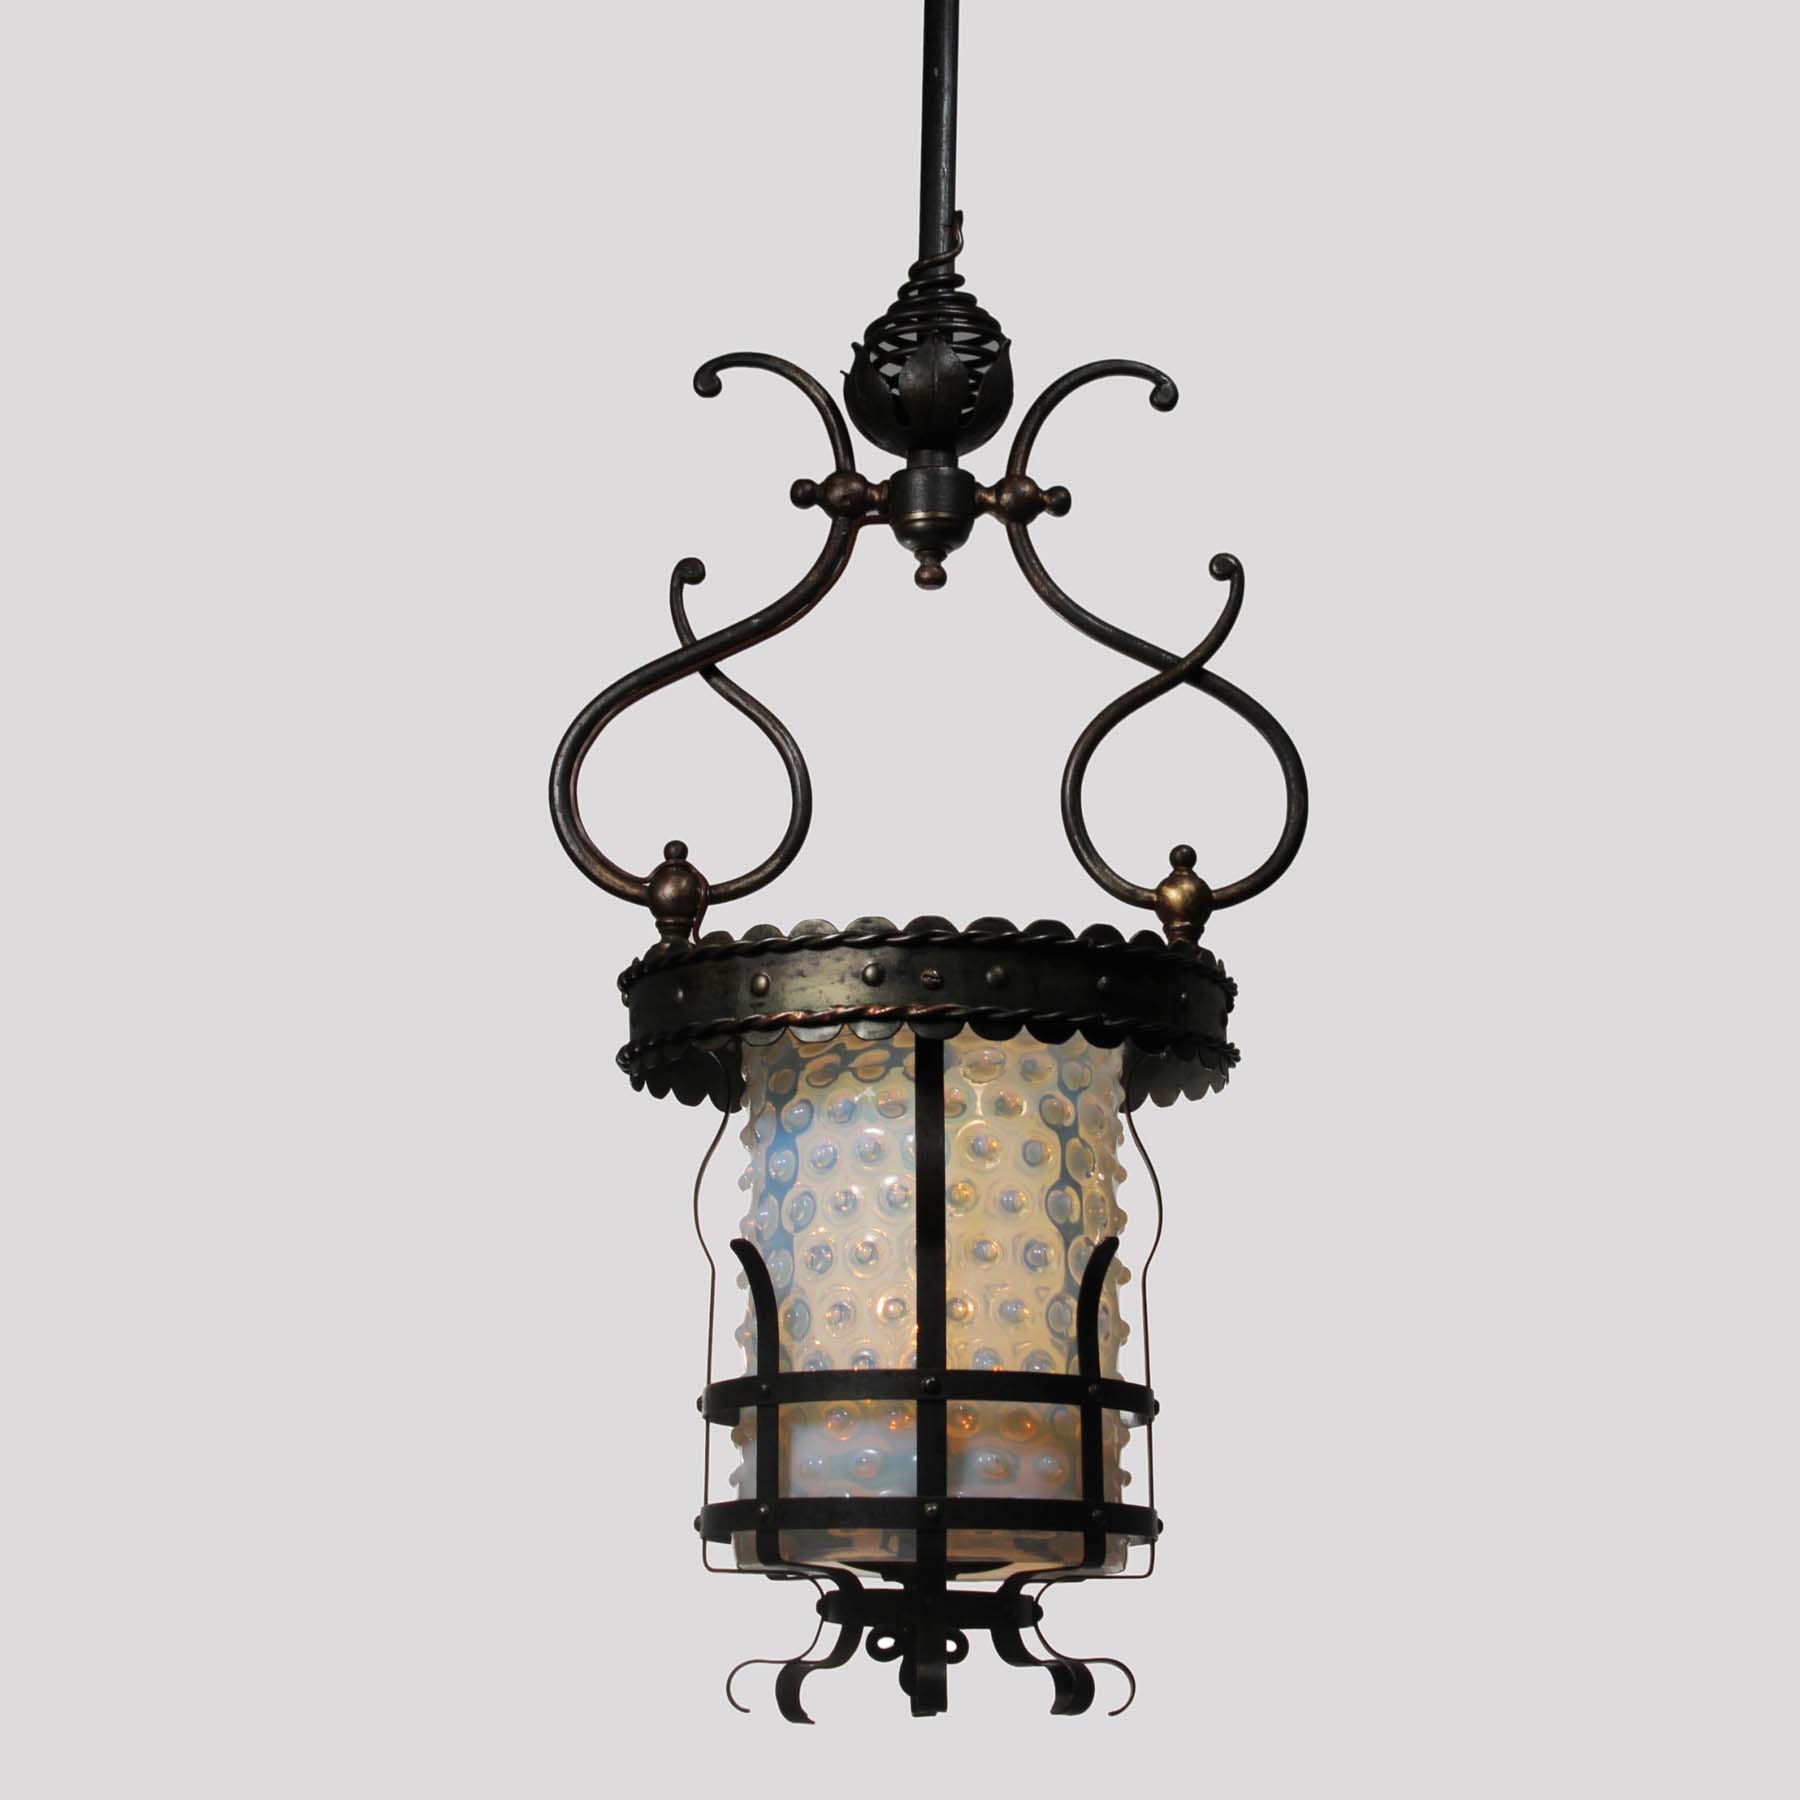 SOLD Antique Gas Lantern with Hobnail Shade, c. 1880’s-69502